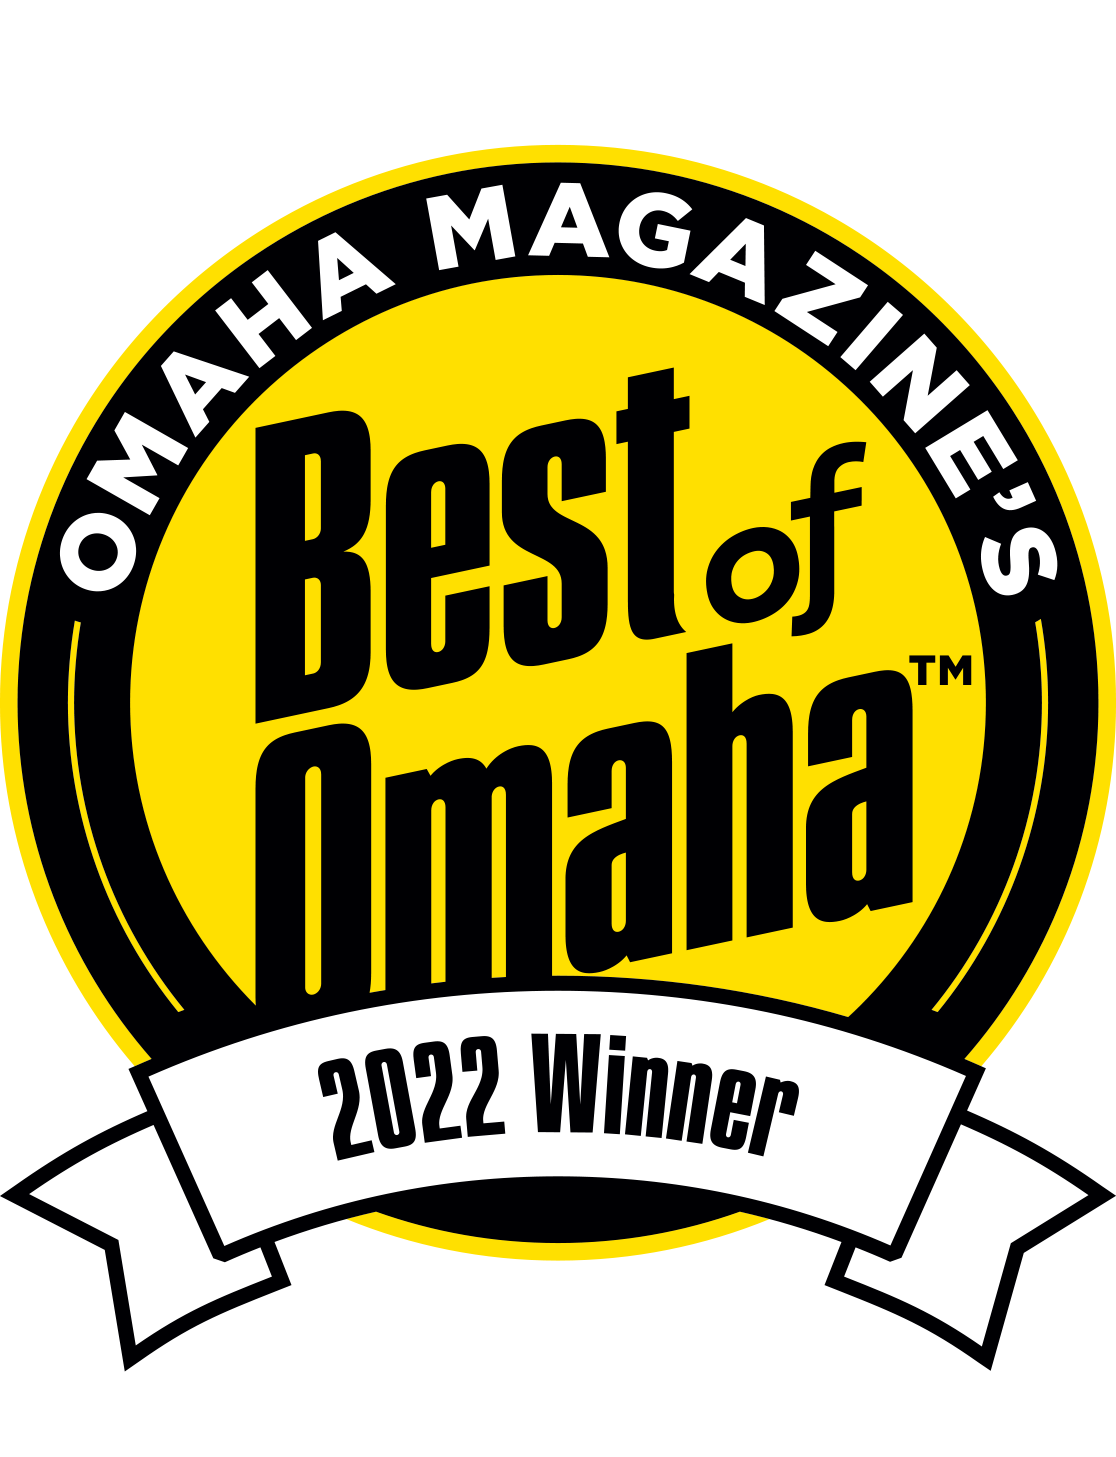 Best Of Omaha Corporate Creations